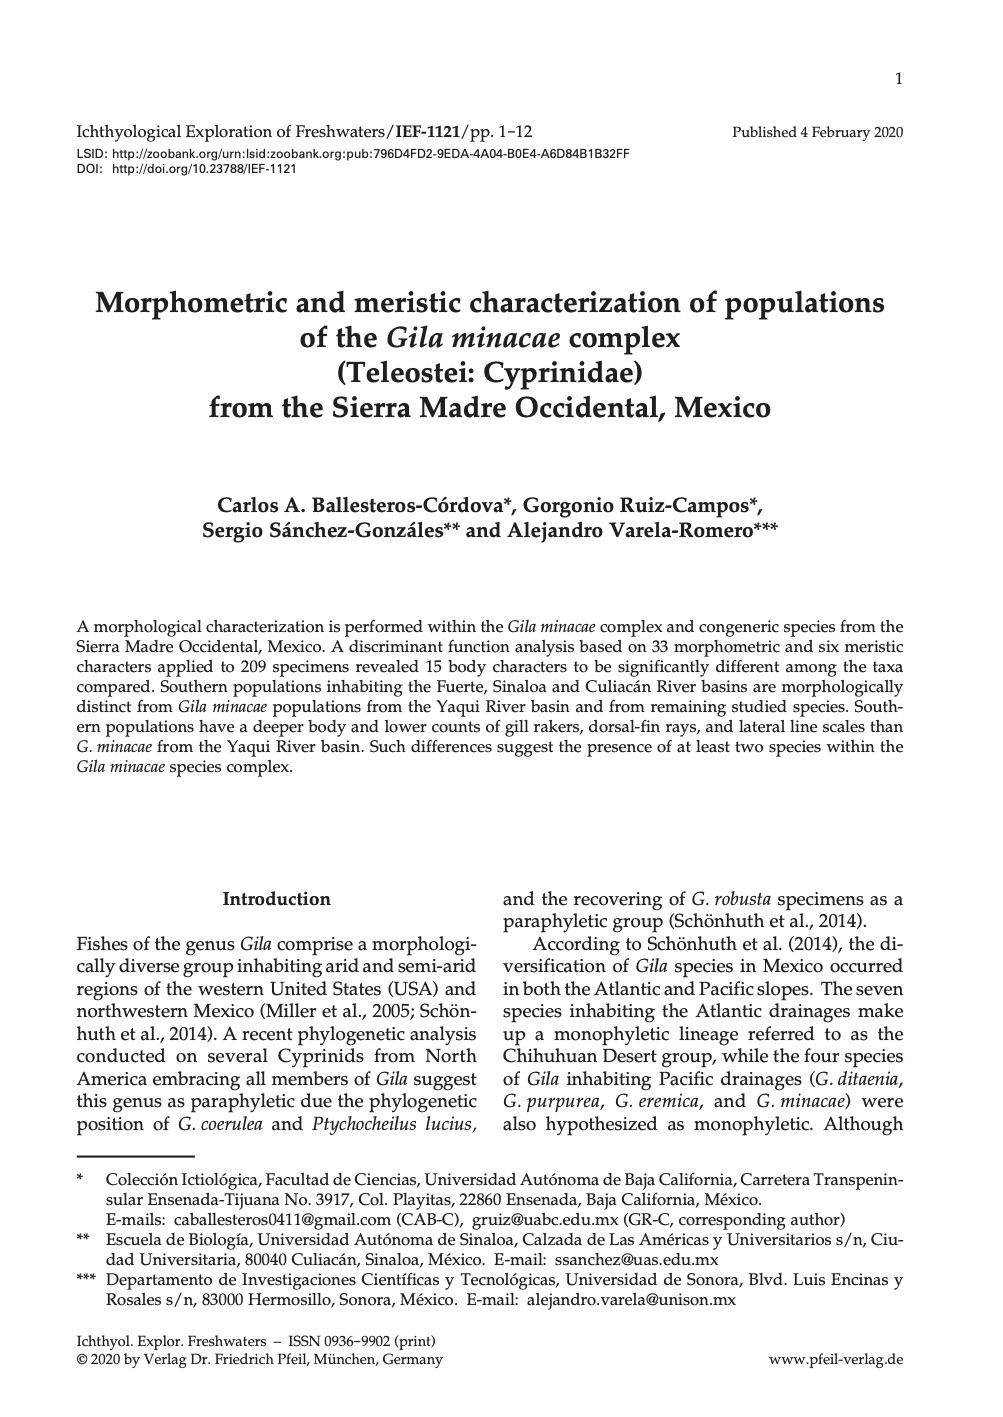 Morphometric and meristic characterization of populations of the Gila minacae complex (Teleostei: Cyprinidae) from the Sierra Madre Occidental, Mexico